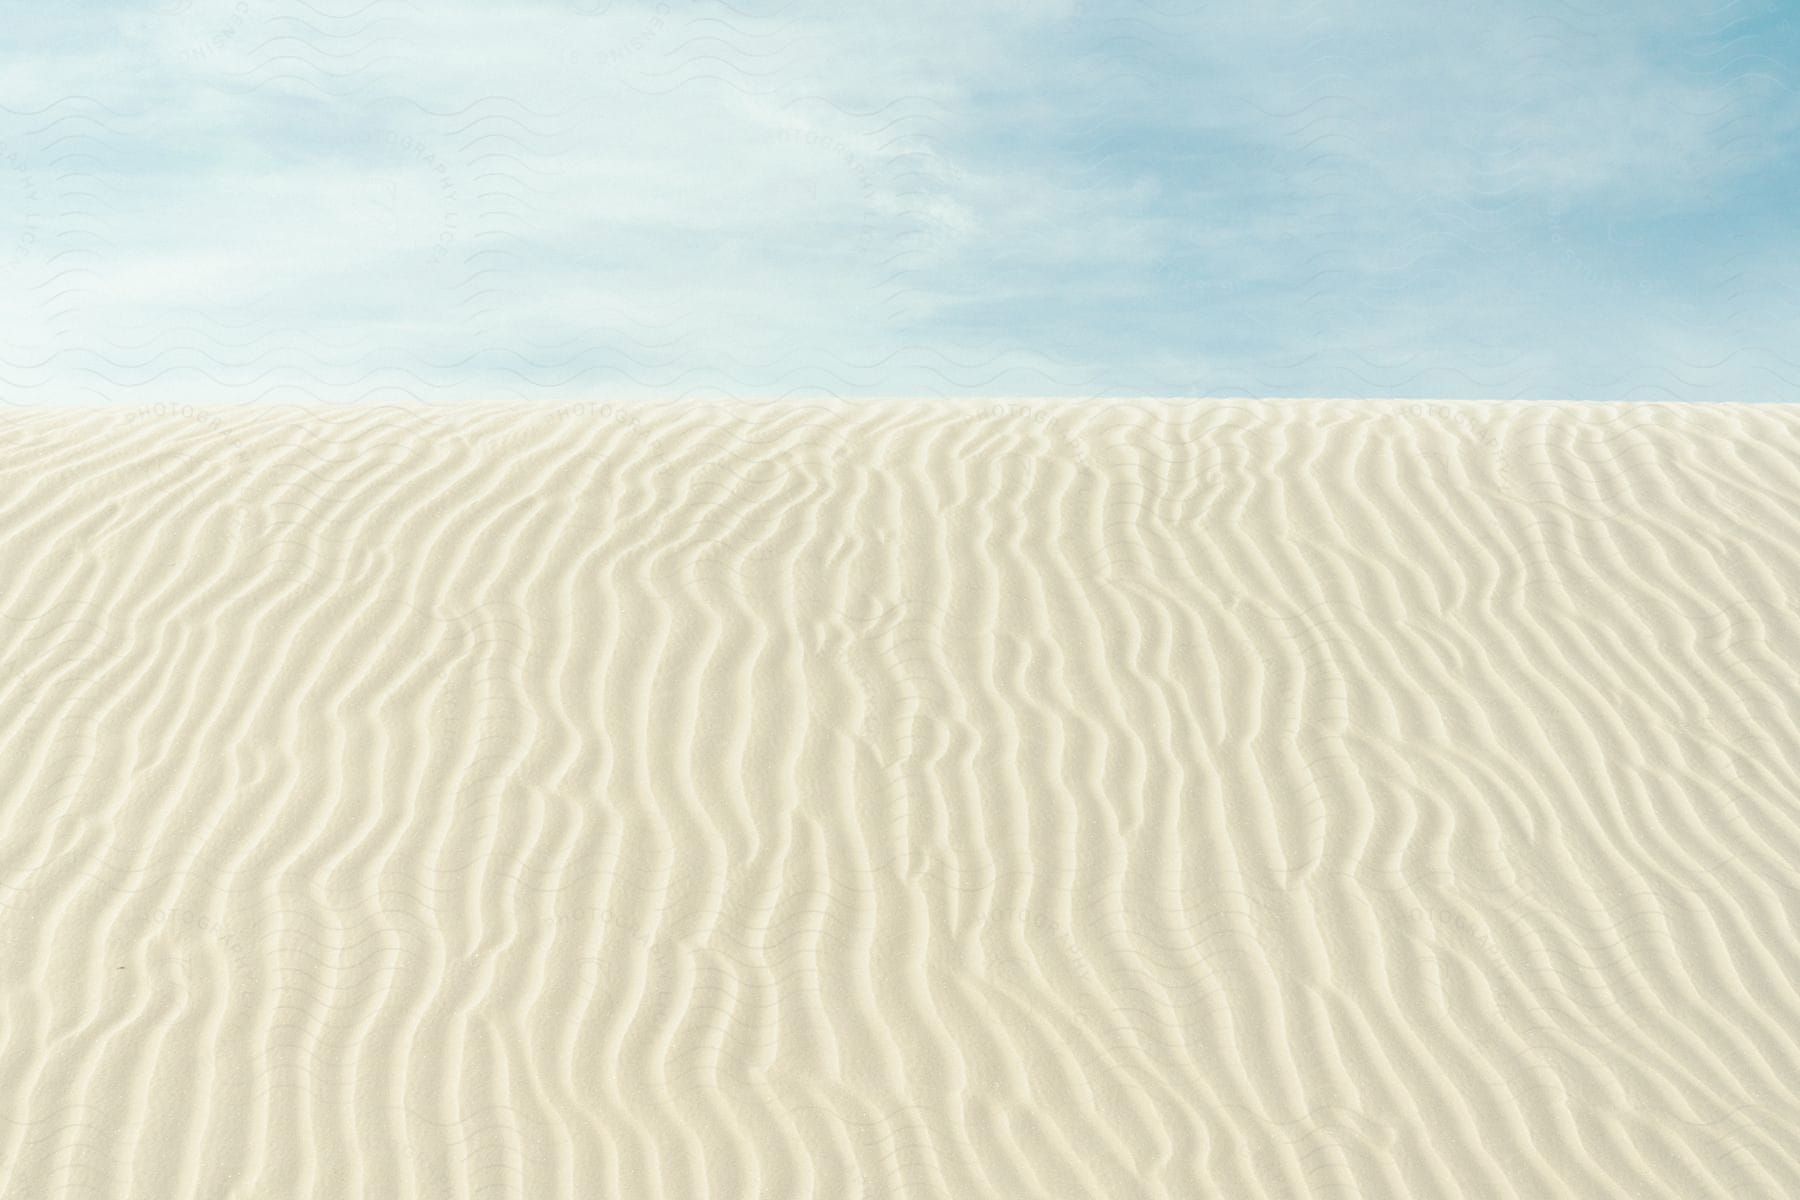 Flat landscape with white sand in a desert setting